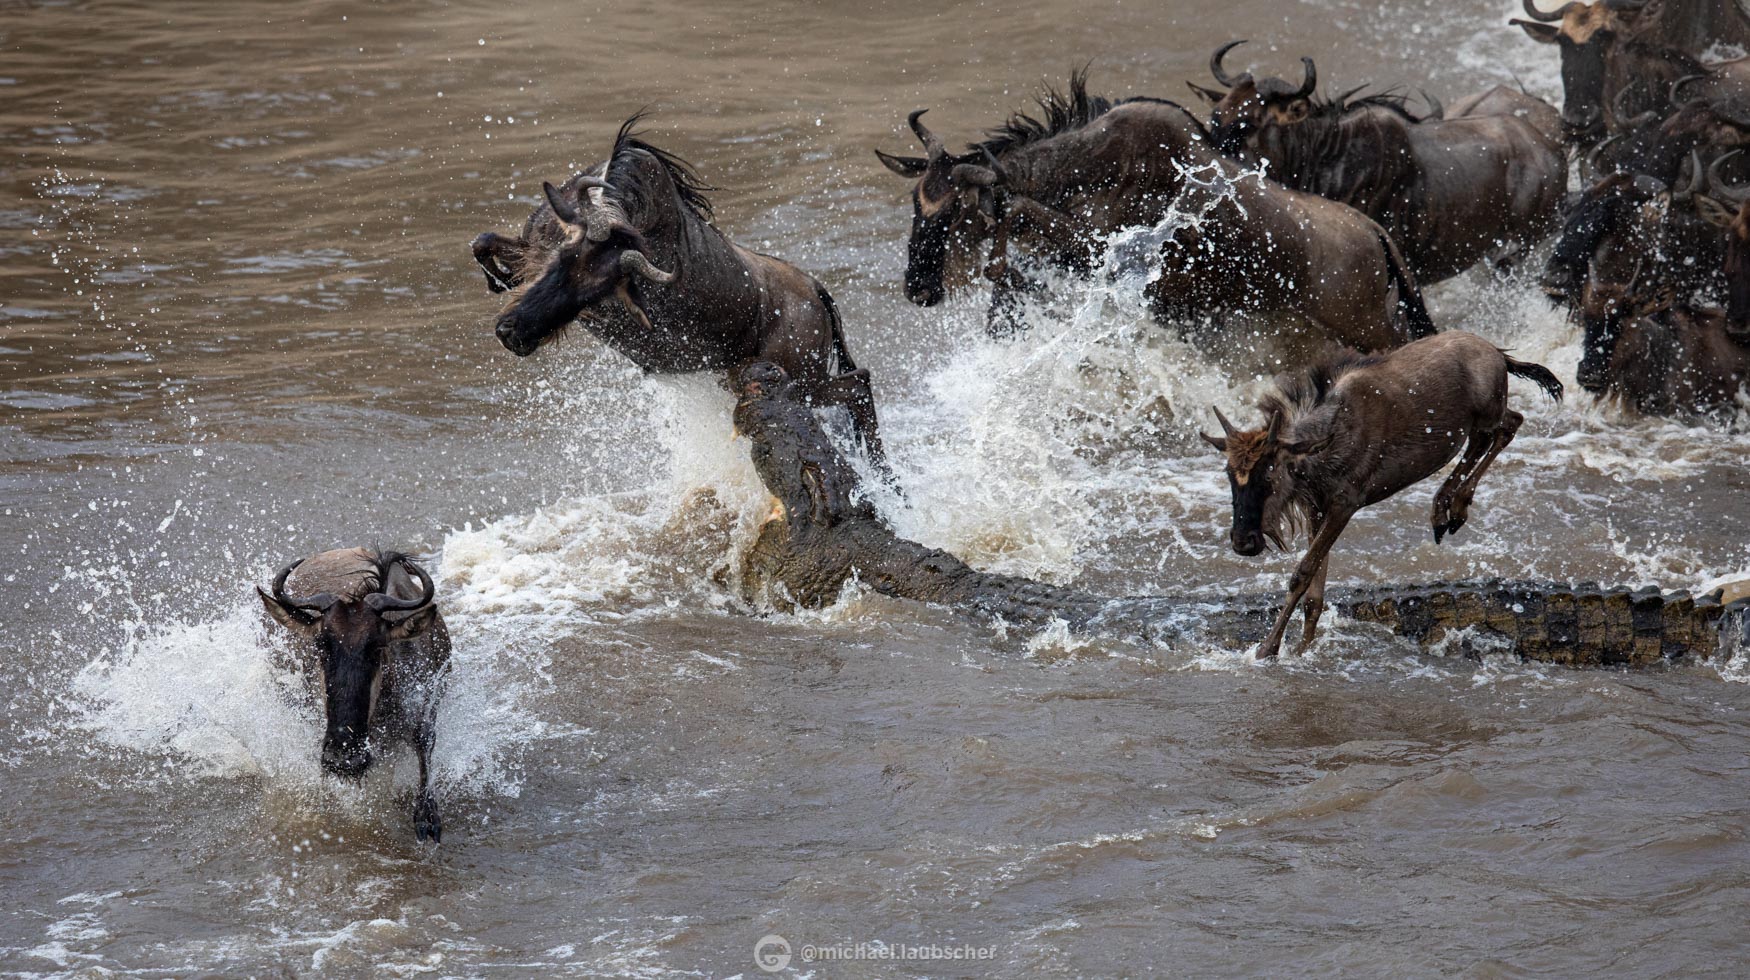 The Magic of the Mara - The Great Migration Explained - Michael Laubscher